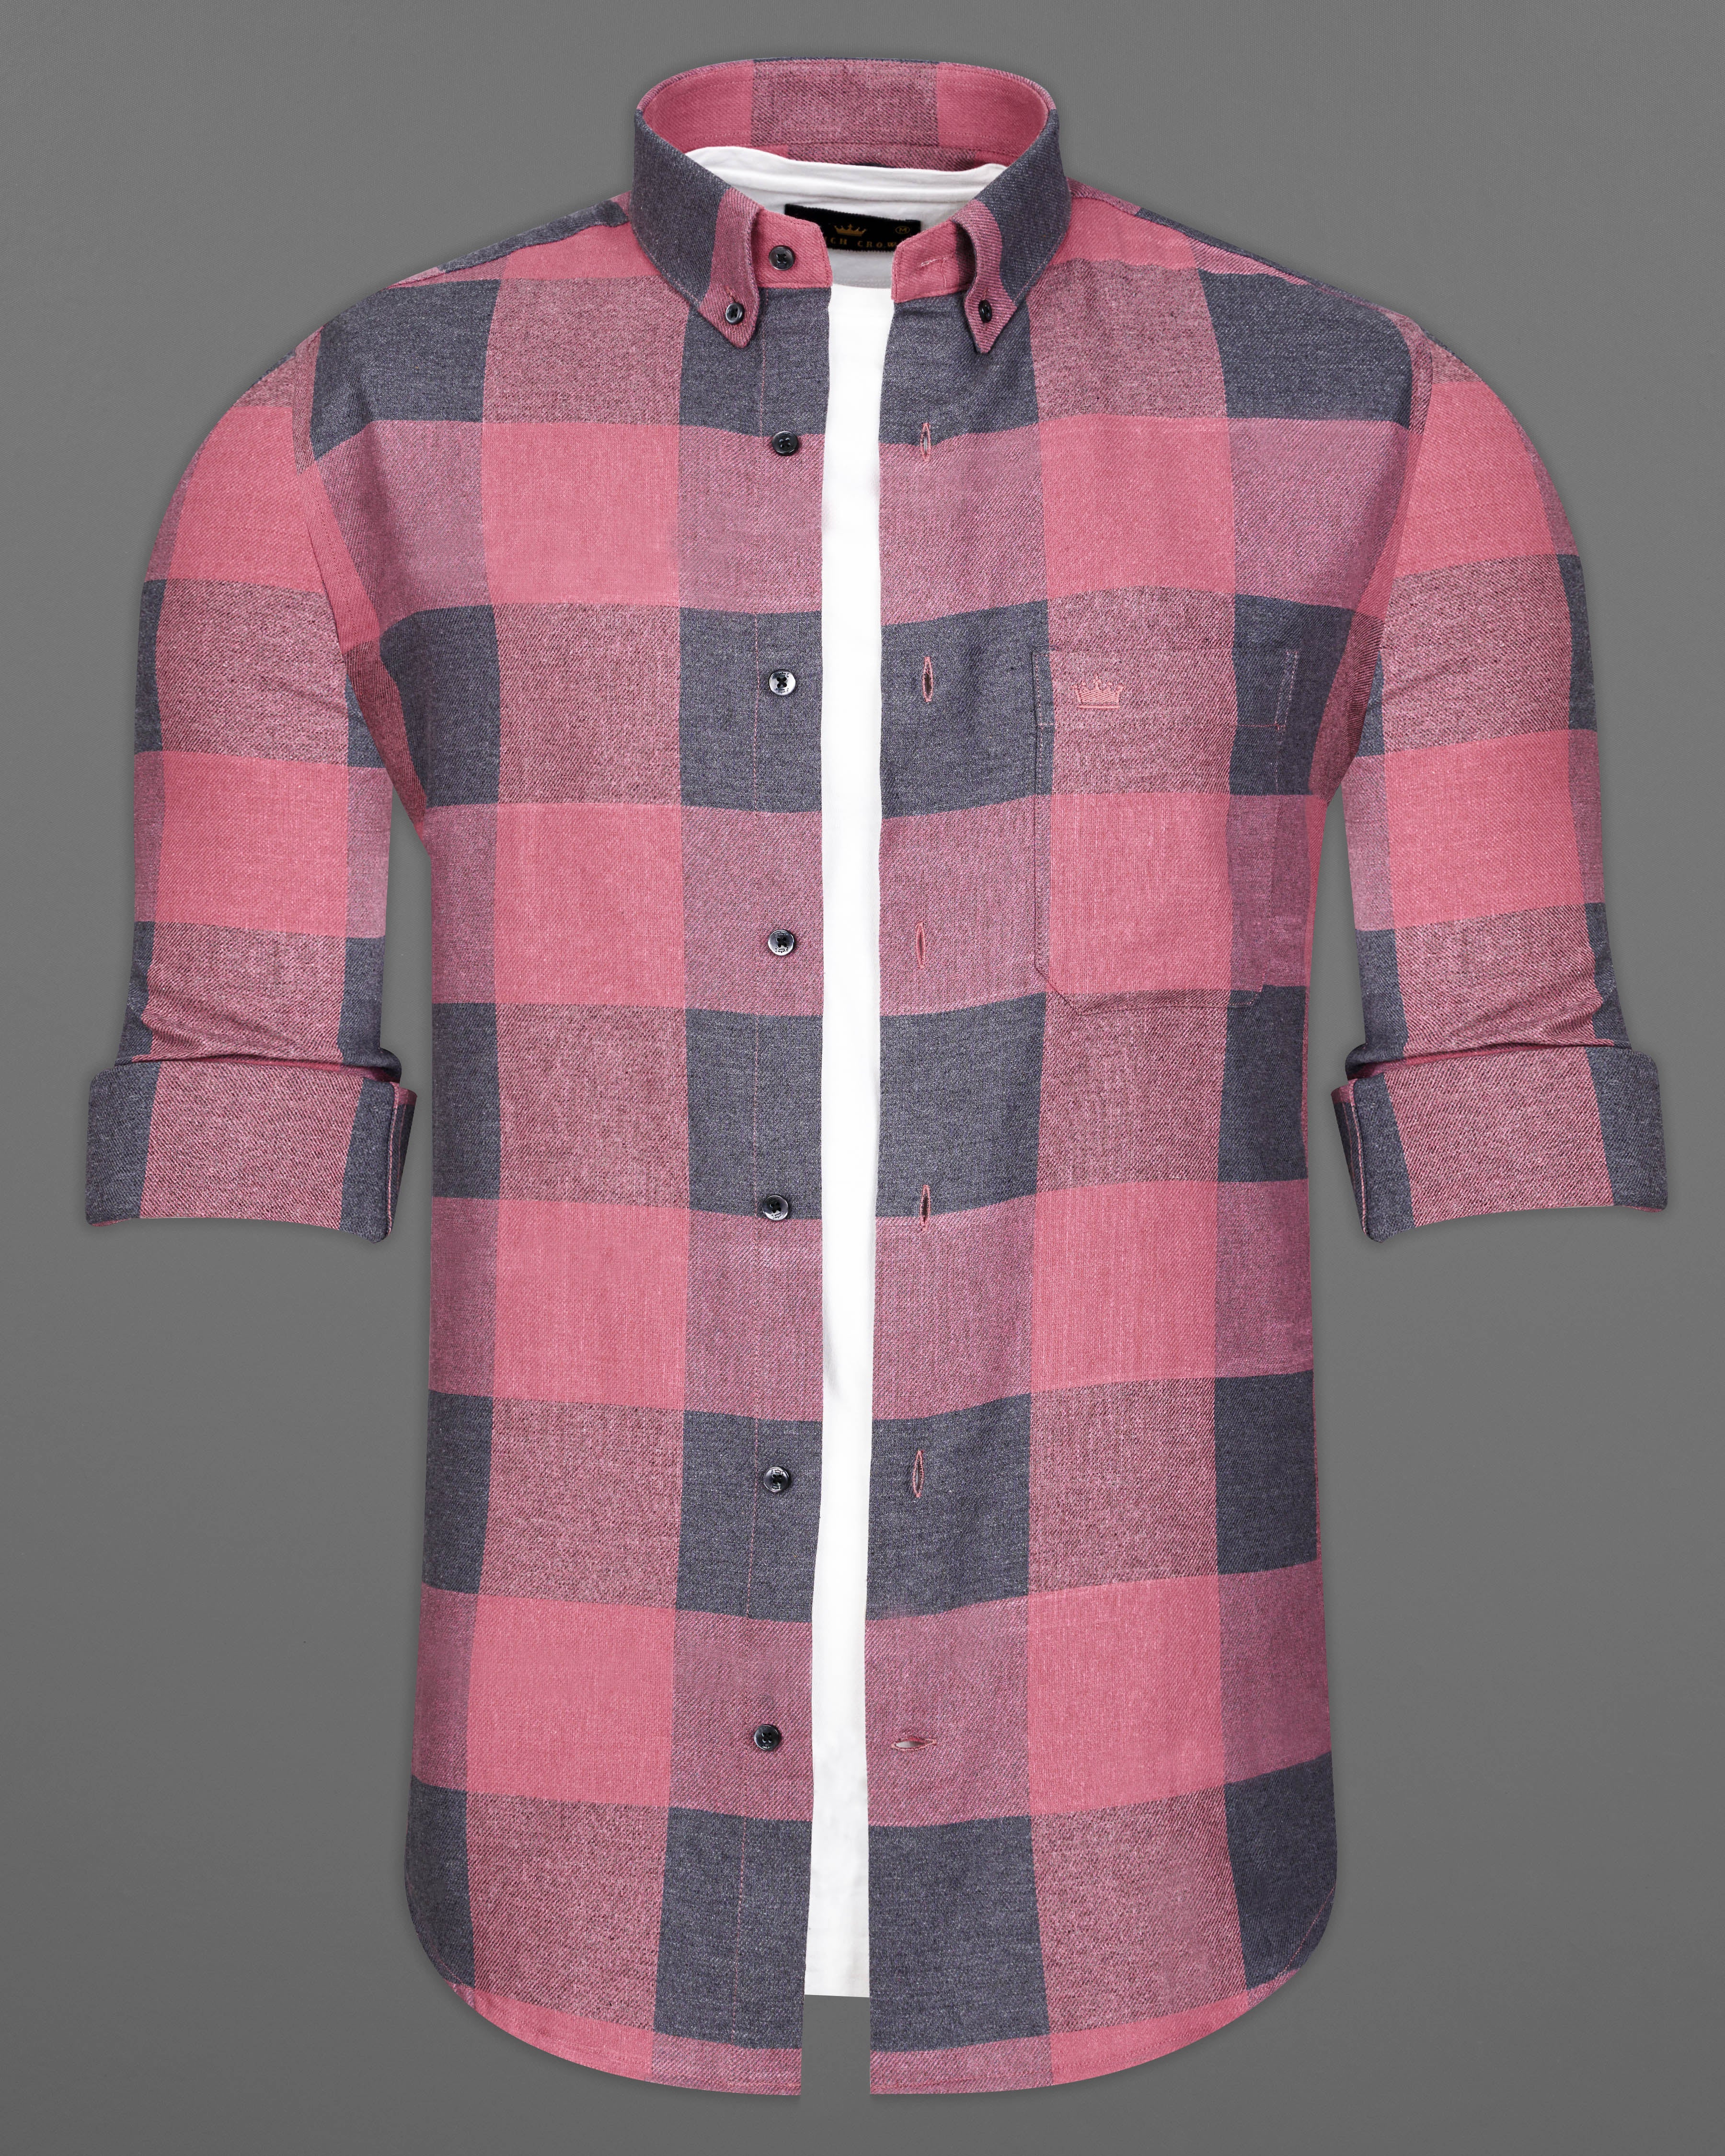 Turkish Pink with Gravel Gray Twill Checked Premium Cotton Overshirt 9463-BD-BLK-OS-38, 9463-BD-BLK-OS-H-38, 9463-BD-BLK-OS-39, 9463-BD-BLK-OS-H-39, 9463-BD-BLK-OS-40, 9463-BD-BLK-OS-H-40, 9463-BD-BLK-OS-42, 9463-BD-BLK-OS-H-42, 9463-BD-BLK-OS-44, 9463-BD-BLK-OS-H-44, 9463-BD-BLK-OS-46, 9463-BD-BLK-OS-H-46, 9463-BD-BLK-OS-48, 9463-BD-BLK-OS-H-48, 9463-BD-BLK-OS-50, 9463-BD-BLK-OS-H-50, 9463-BD-BLK-OS-52, 9463-BD-BLK-OS-H-52